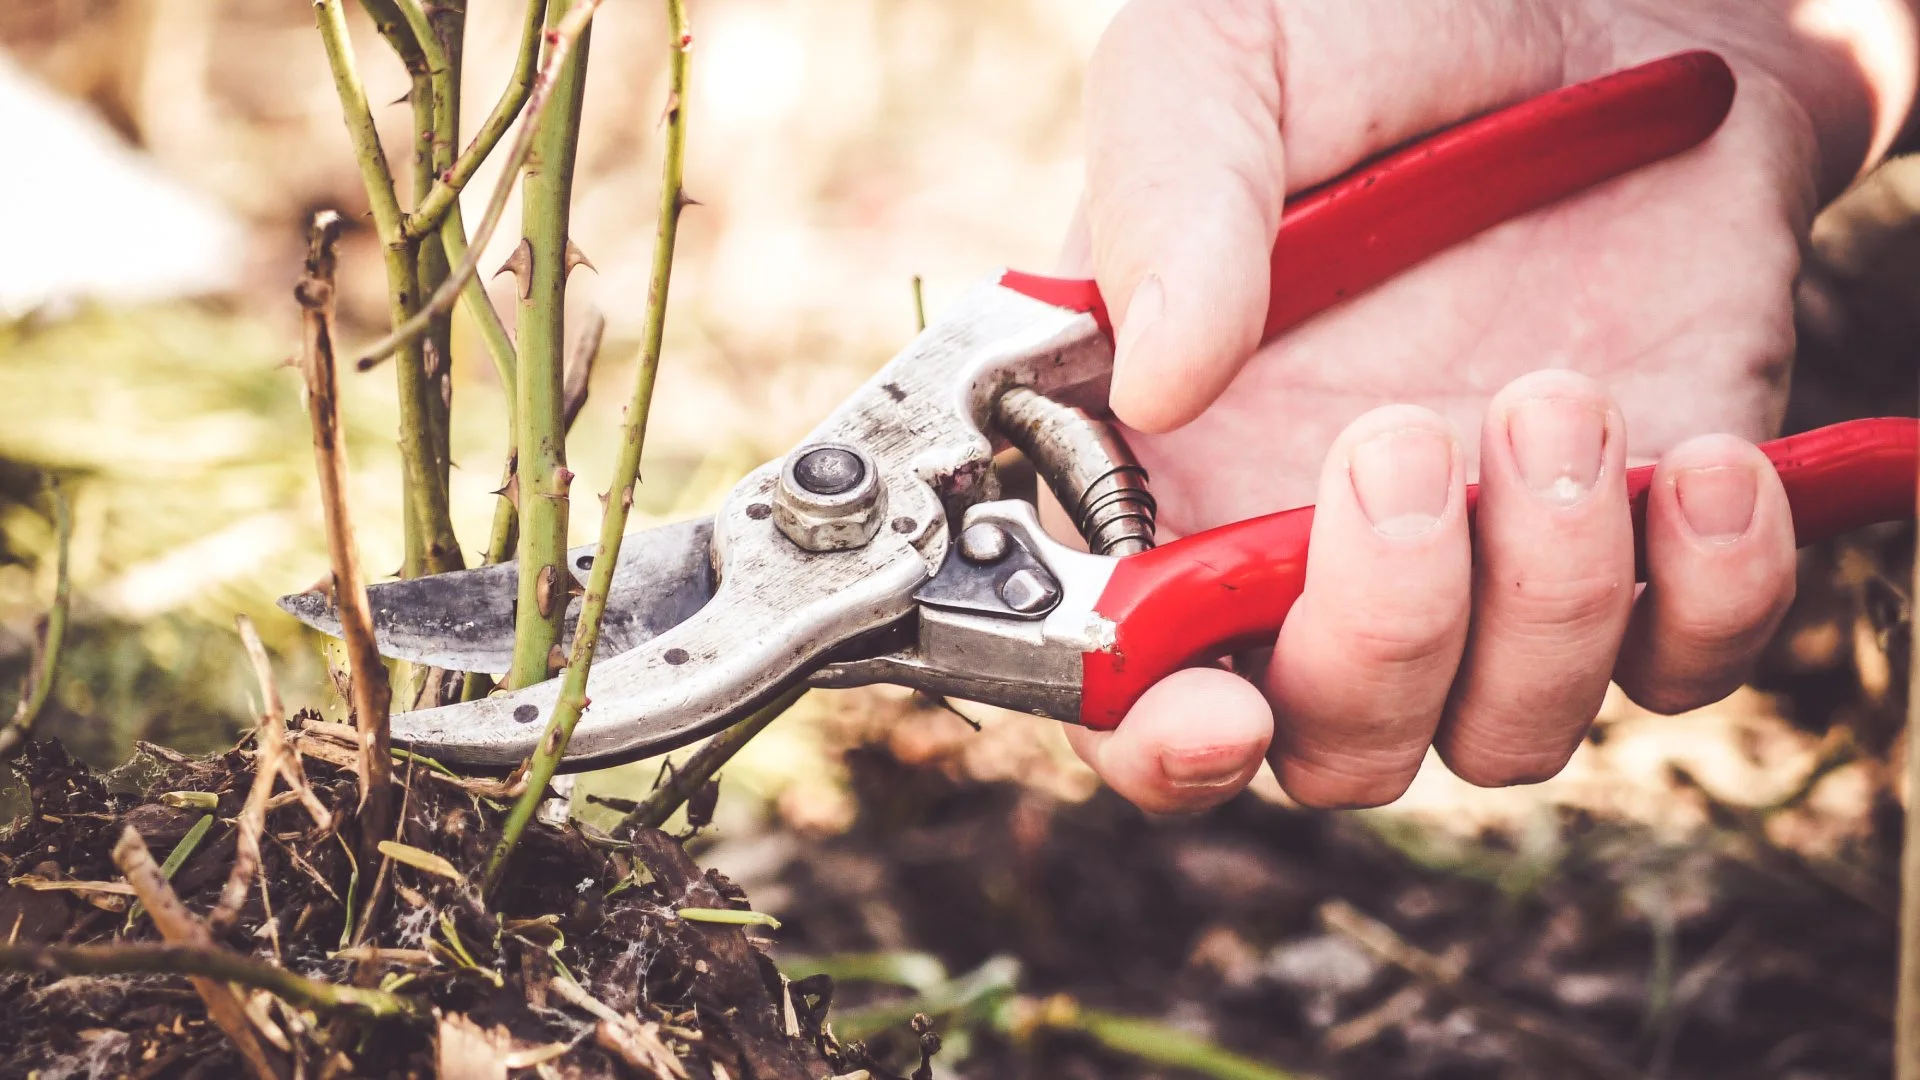 Here's Why You Should Never Attempt DIY Plant Pruning